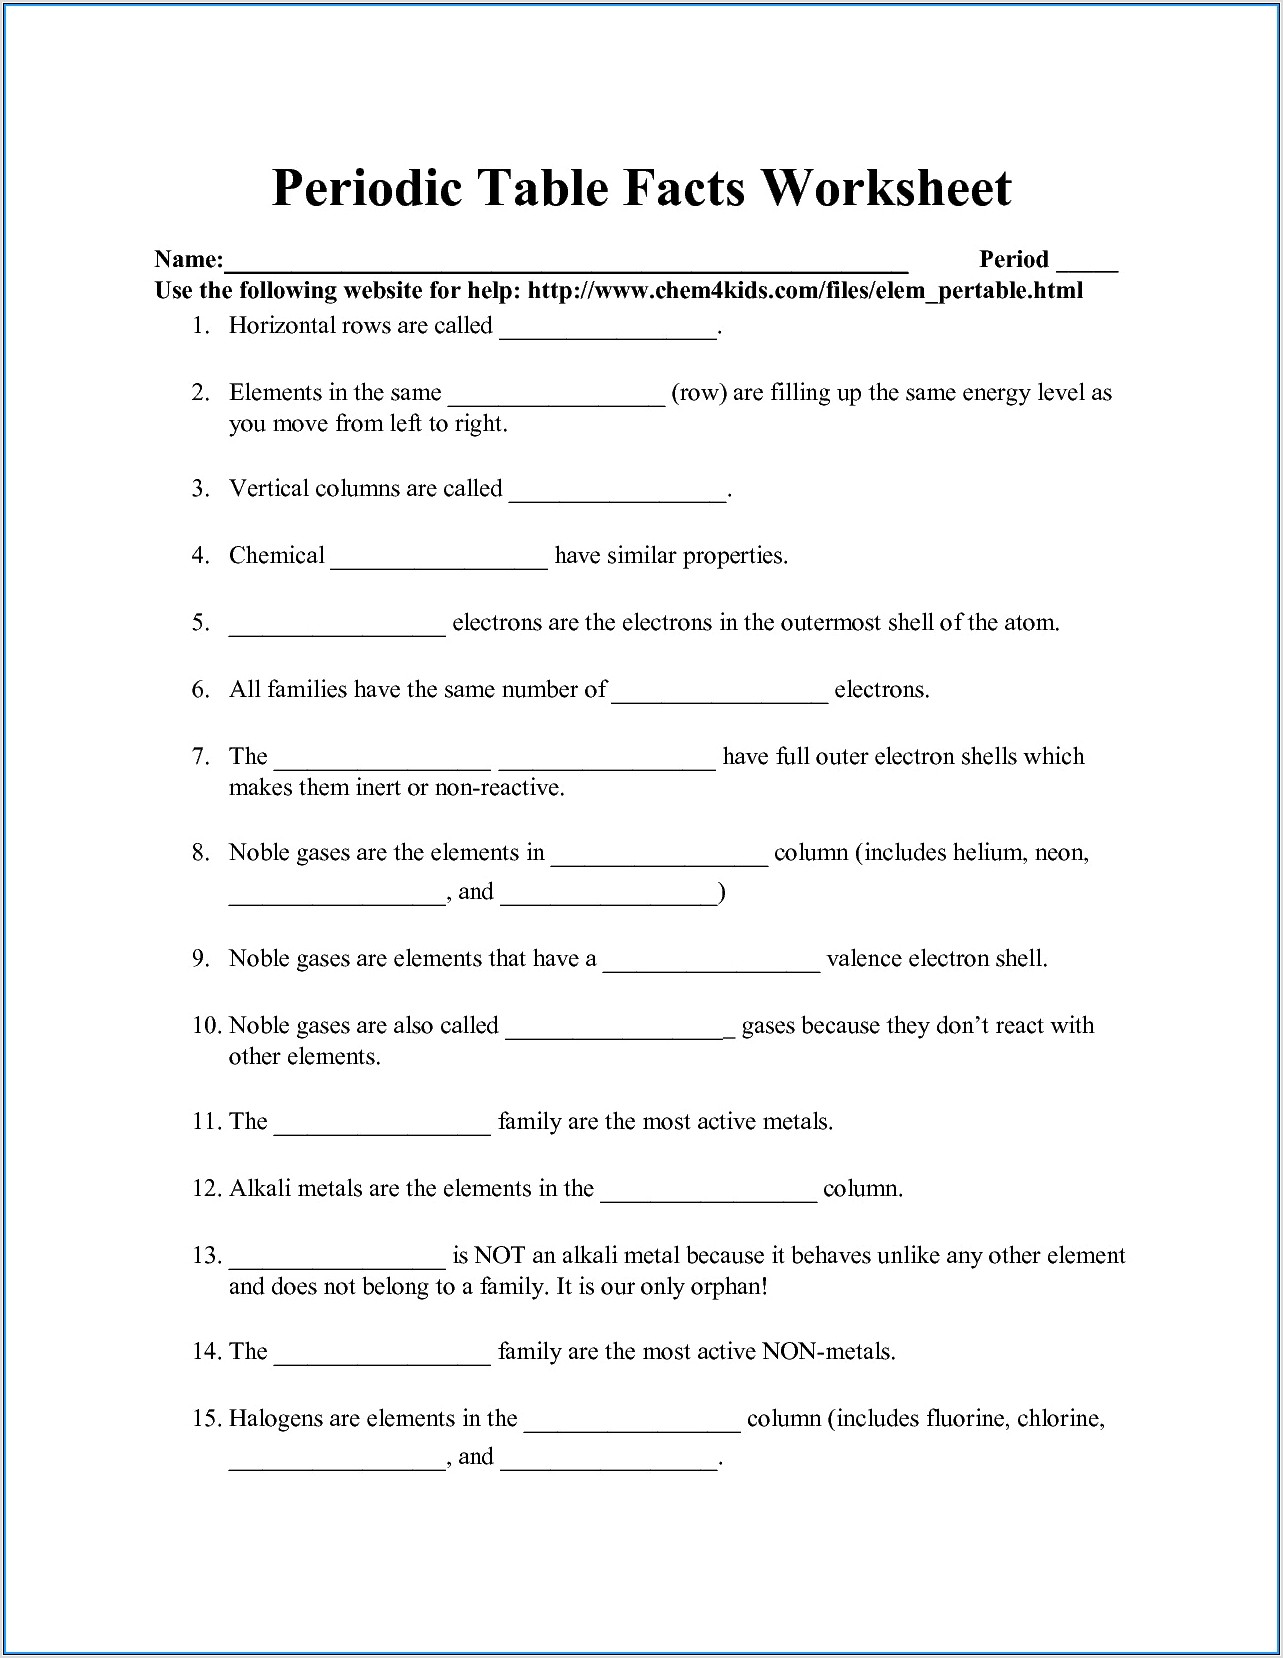 Periodic Table Worksheet For Middle School Pdf